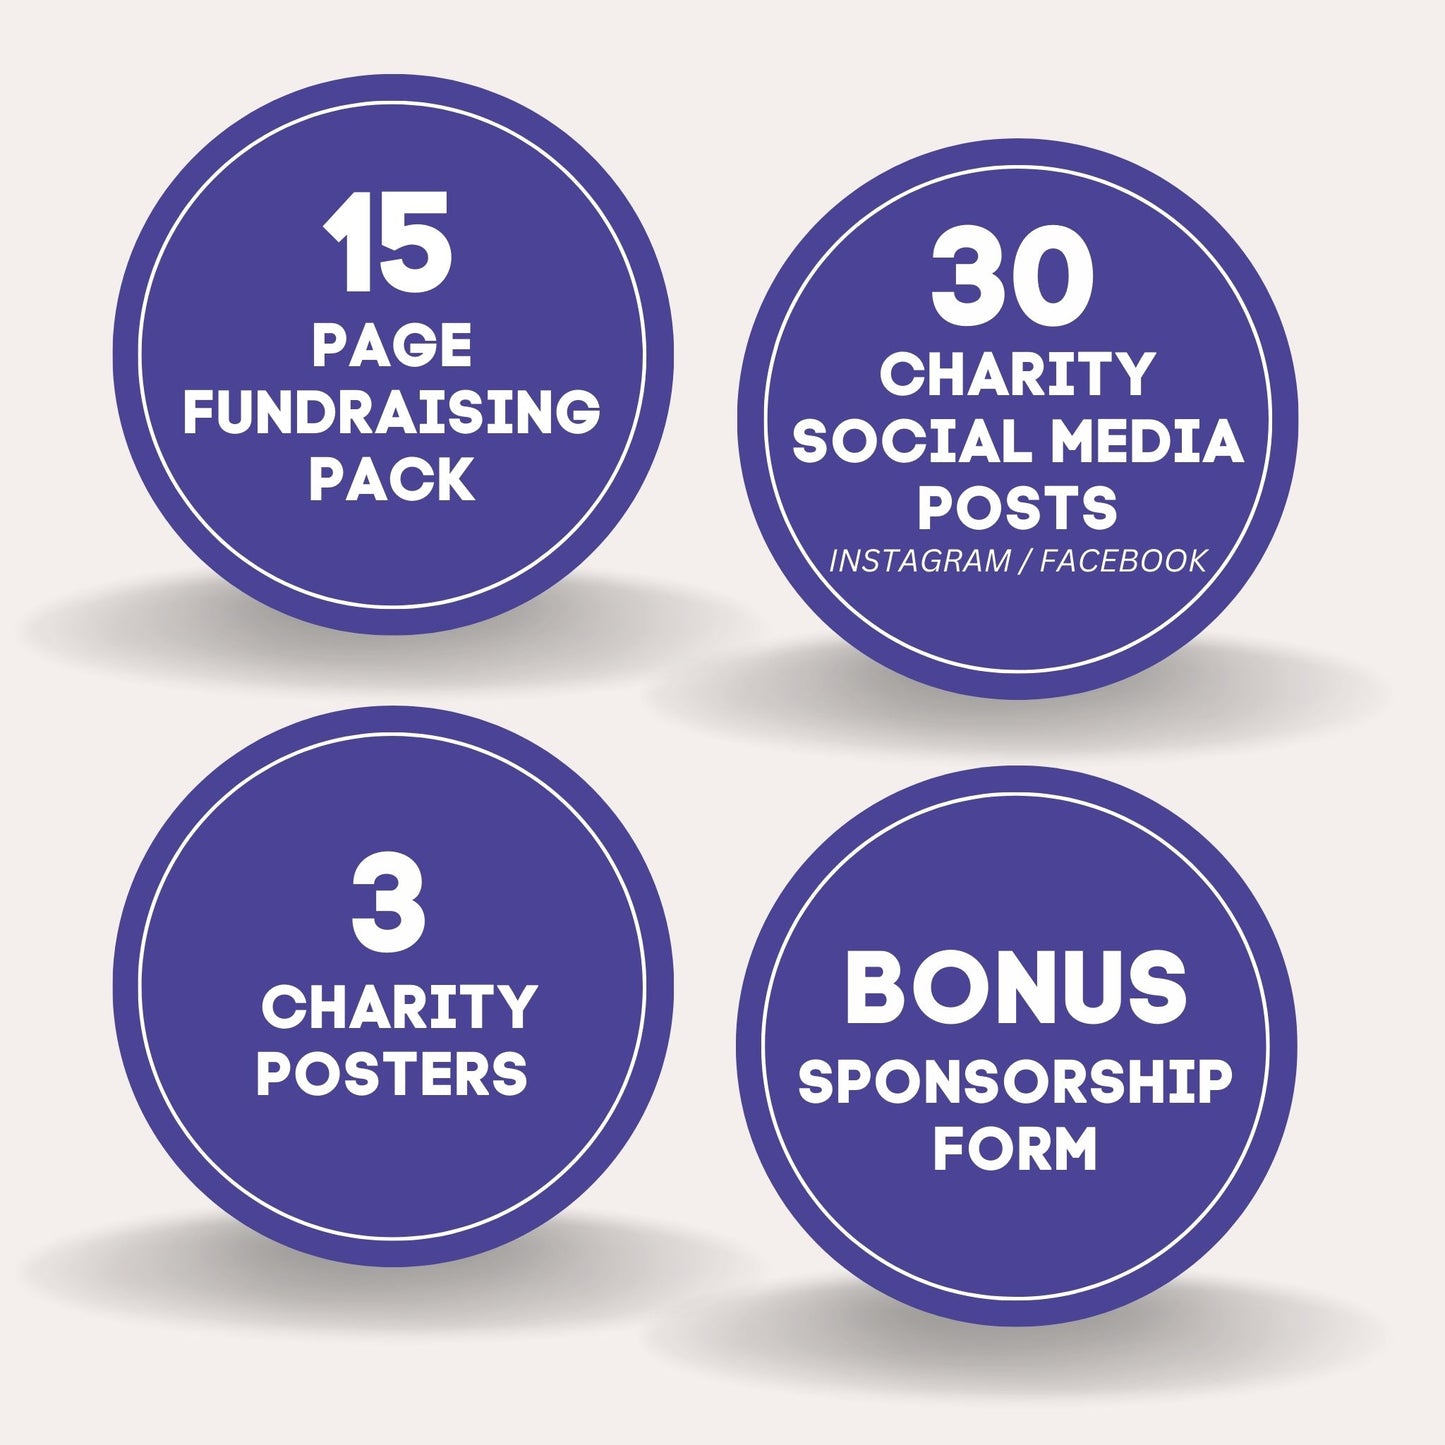 The Bold Bundle For Charities